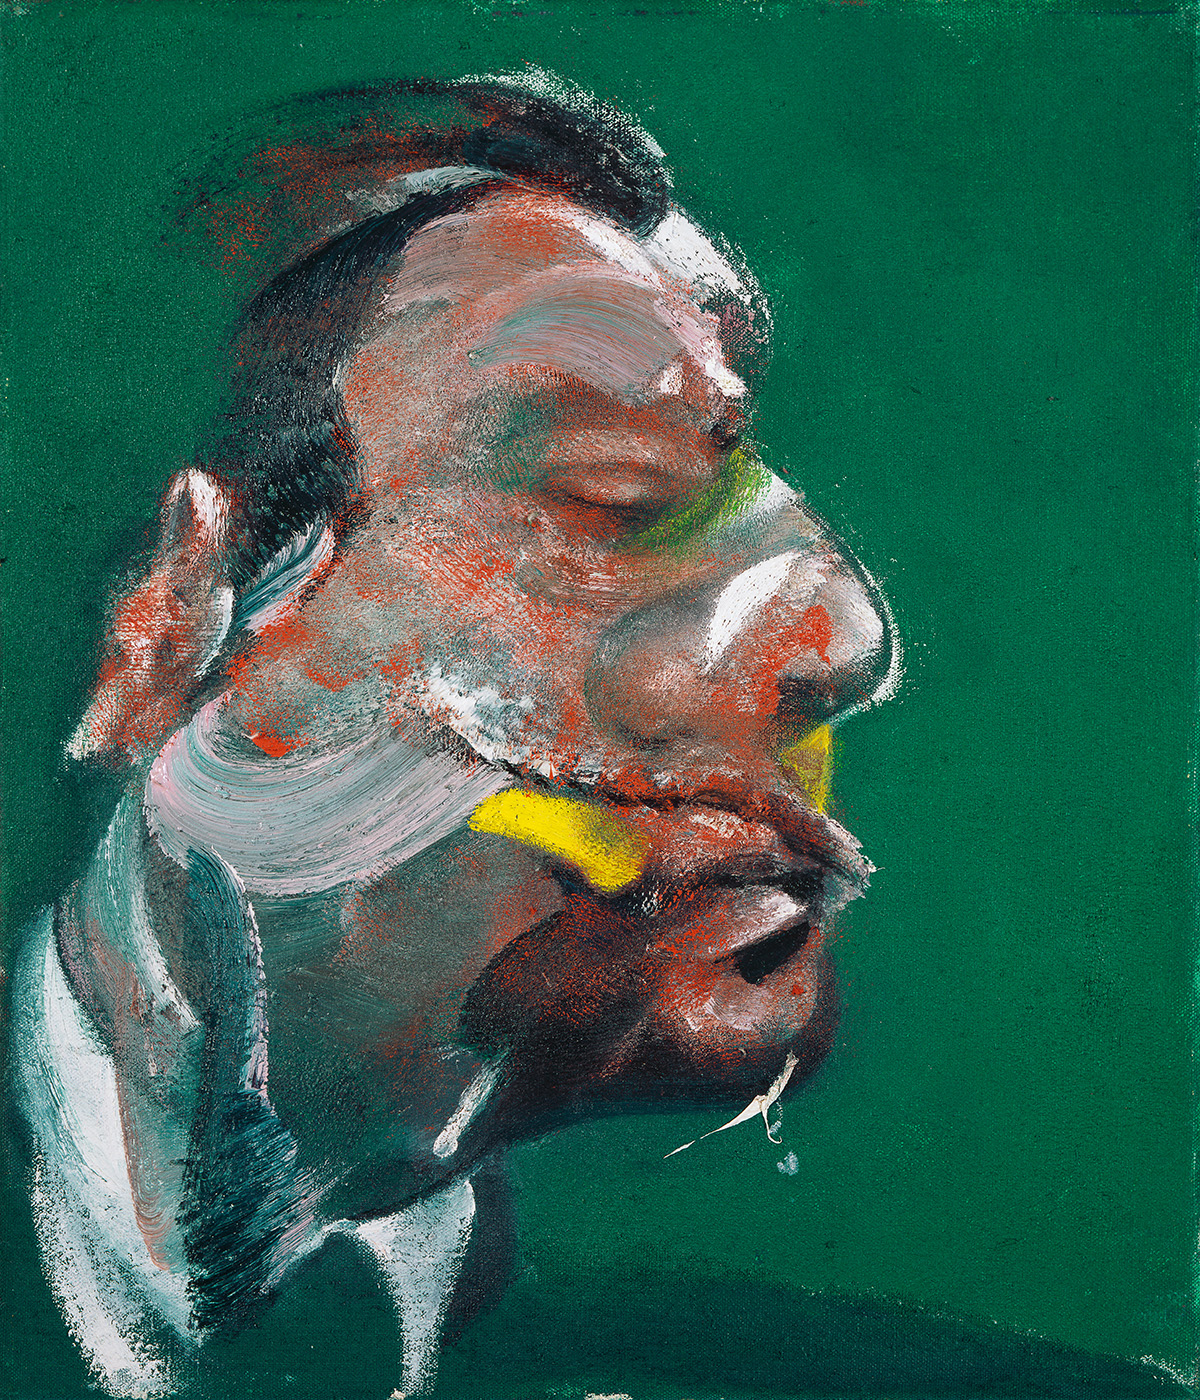 Francis Bacon, Study for Head of George Dyer, 1967. Oil on canvas. CR number 67-06. © The Estate of Francis Bacon / DACS London 2020. All rights reserved.